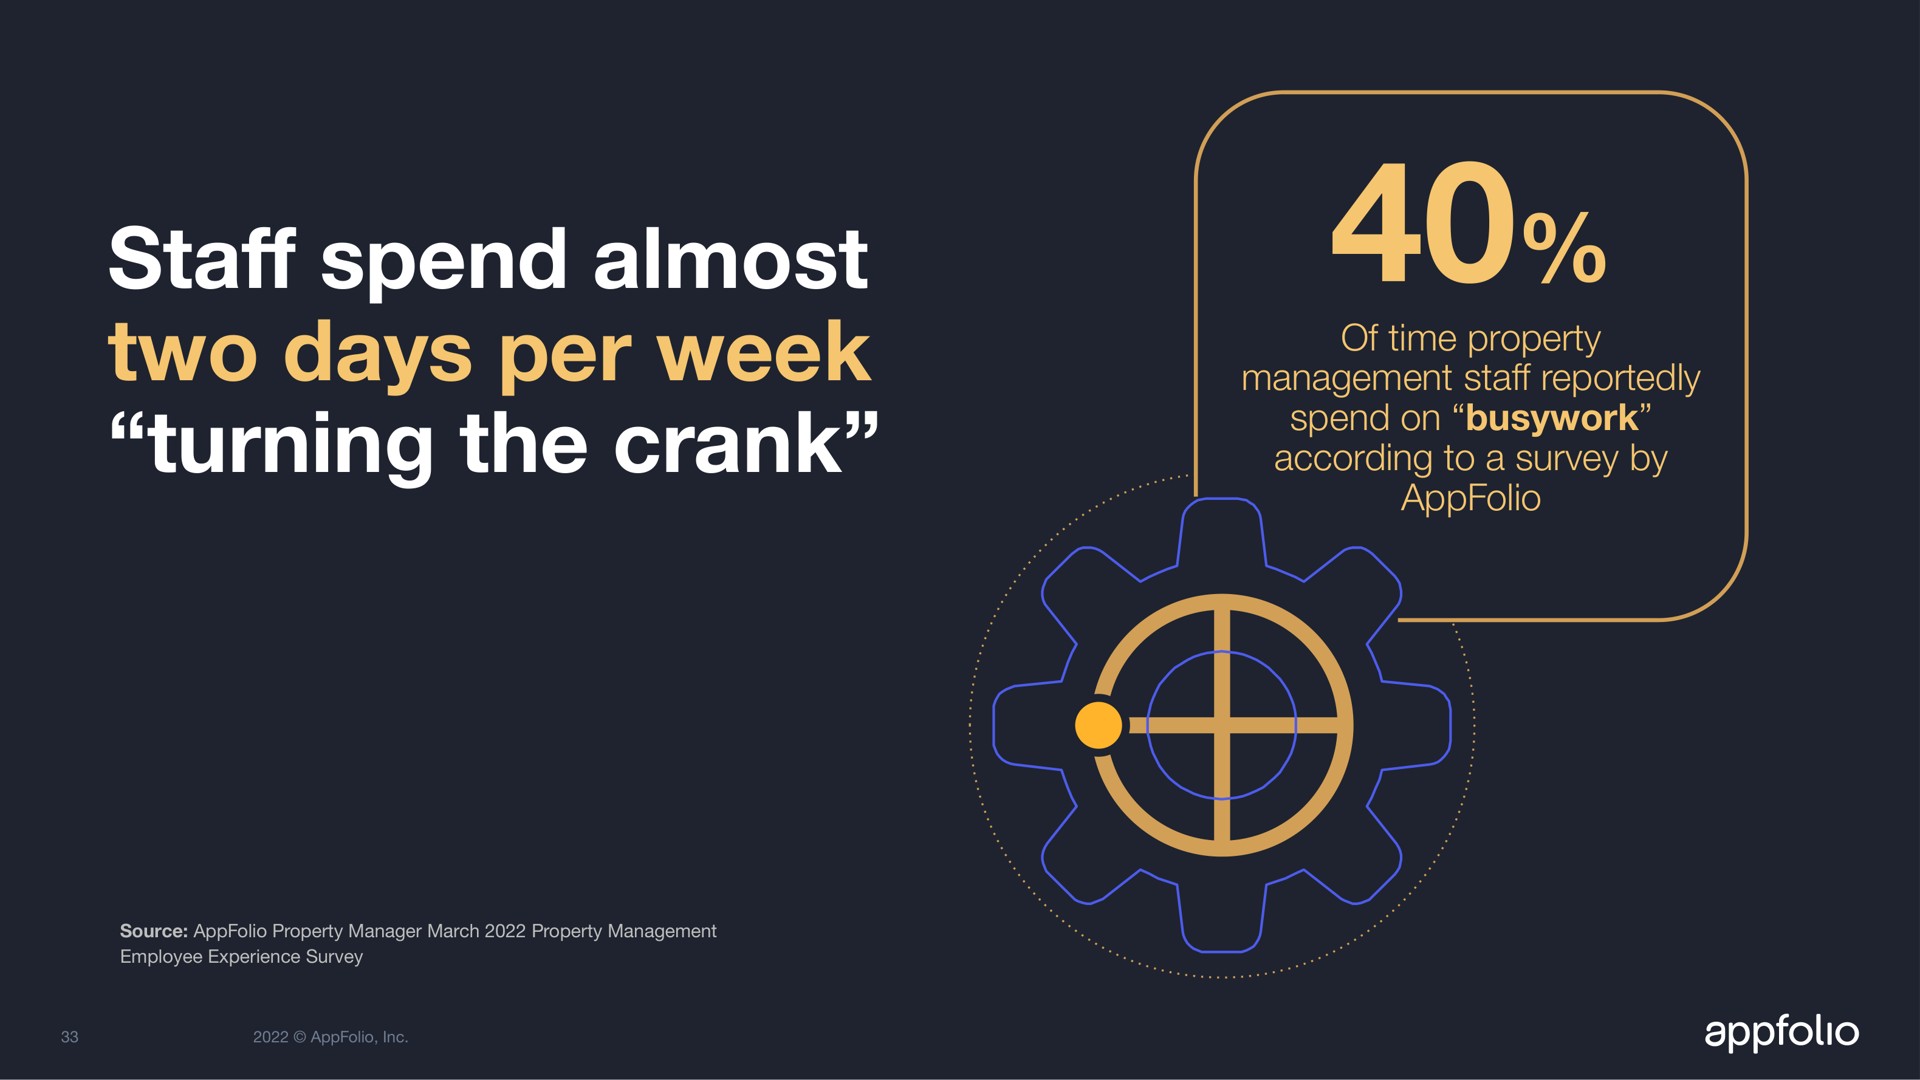 spend almost two days per week turning the crank staff | AppFolio